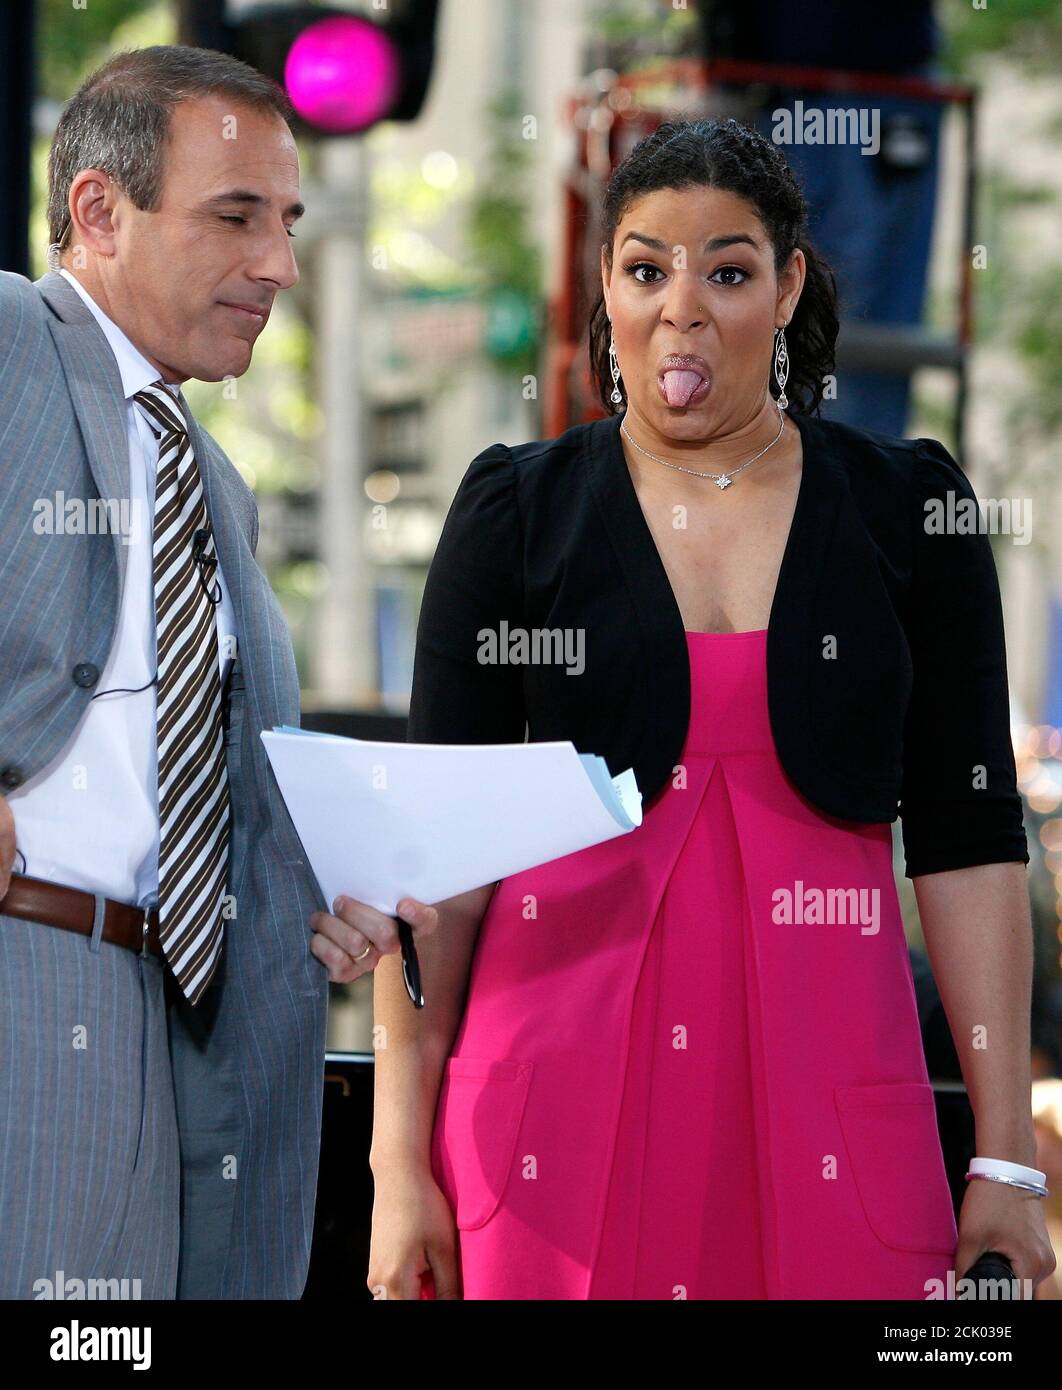 RNPS IMAGES OF THE YEAR 2007 - ENTERTAINMENT - Jordin Sparks, 'American Idol' winner, talks with host Matt Lauer during an appearance on NBC's 'Today' show in New York May 31, 2007. REUTERS/Brendan McDermid  (UNITED STATES) Stock Photo